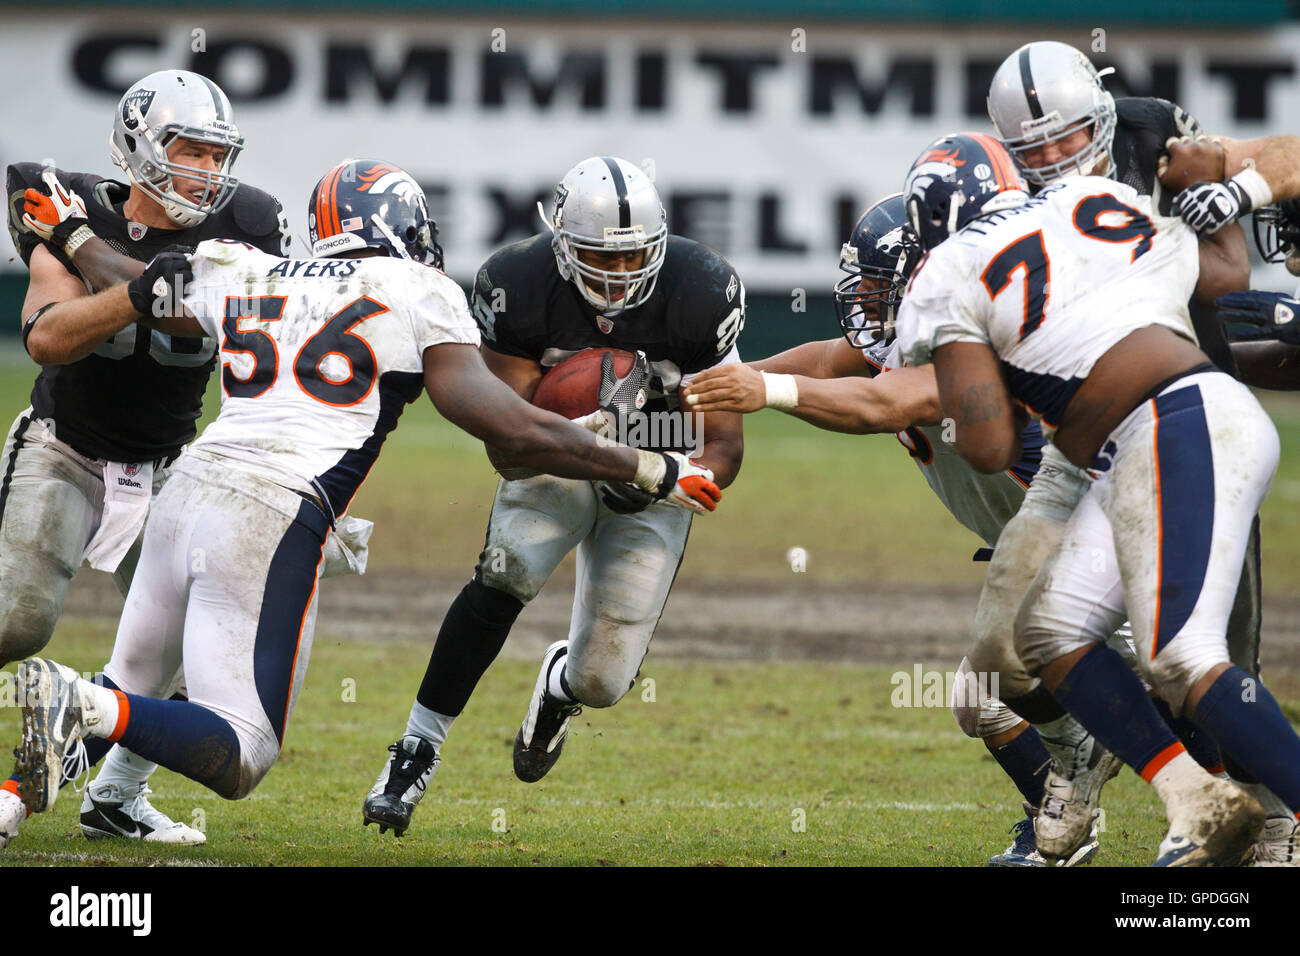 December 19, 2010; Oakland, CA, USA;  Oakland Raiders running back Michael Bush (29) is tackled by Denver Broncos linebacker Robert Ayers (56) during the third quarter at Oakland-Alameda County Coliseum. Oakland defeated Denver 39-23. Stock Photo